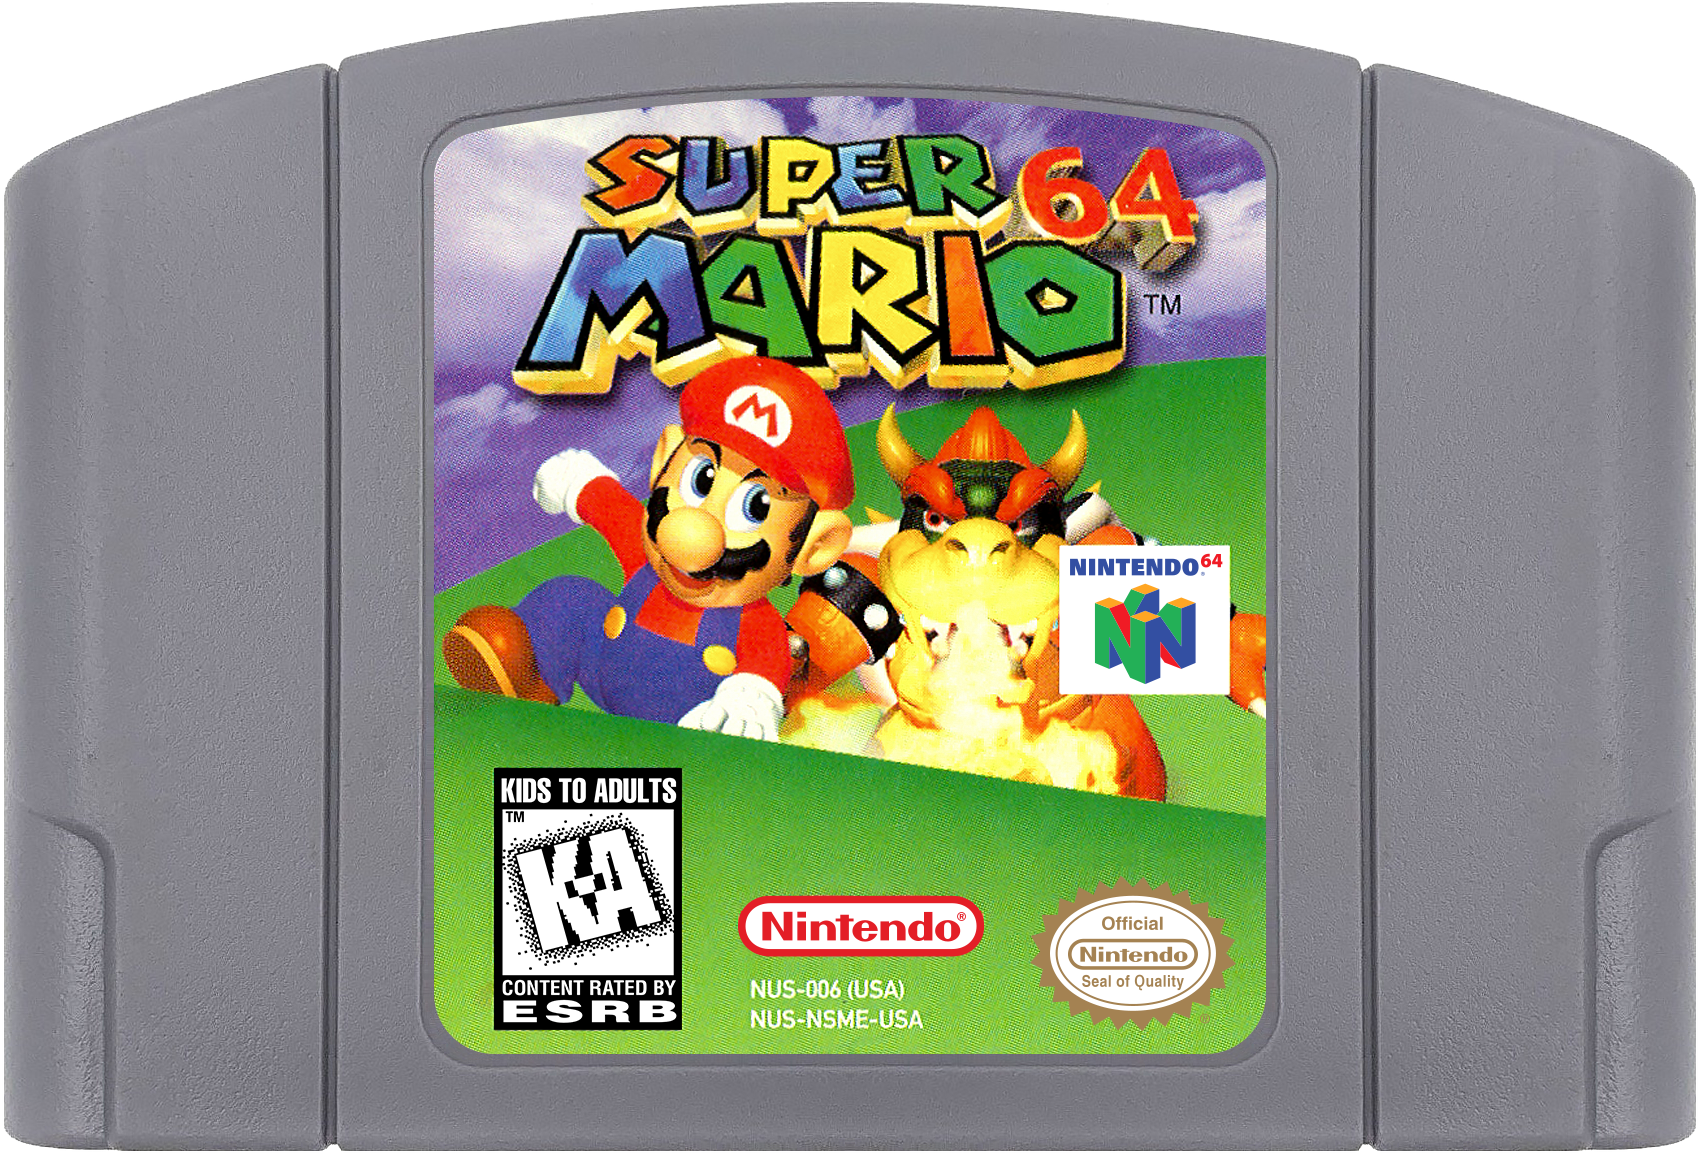 More information about "ABeezy's Nintendo 64 Carts"